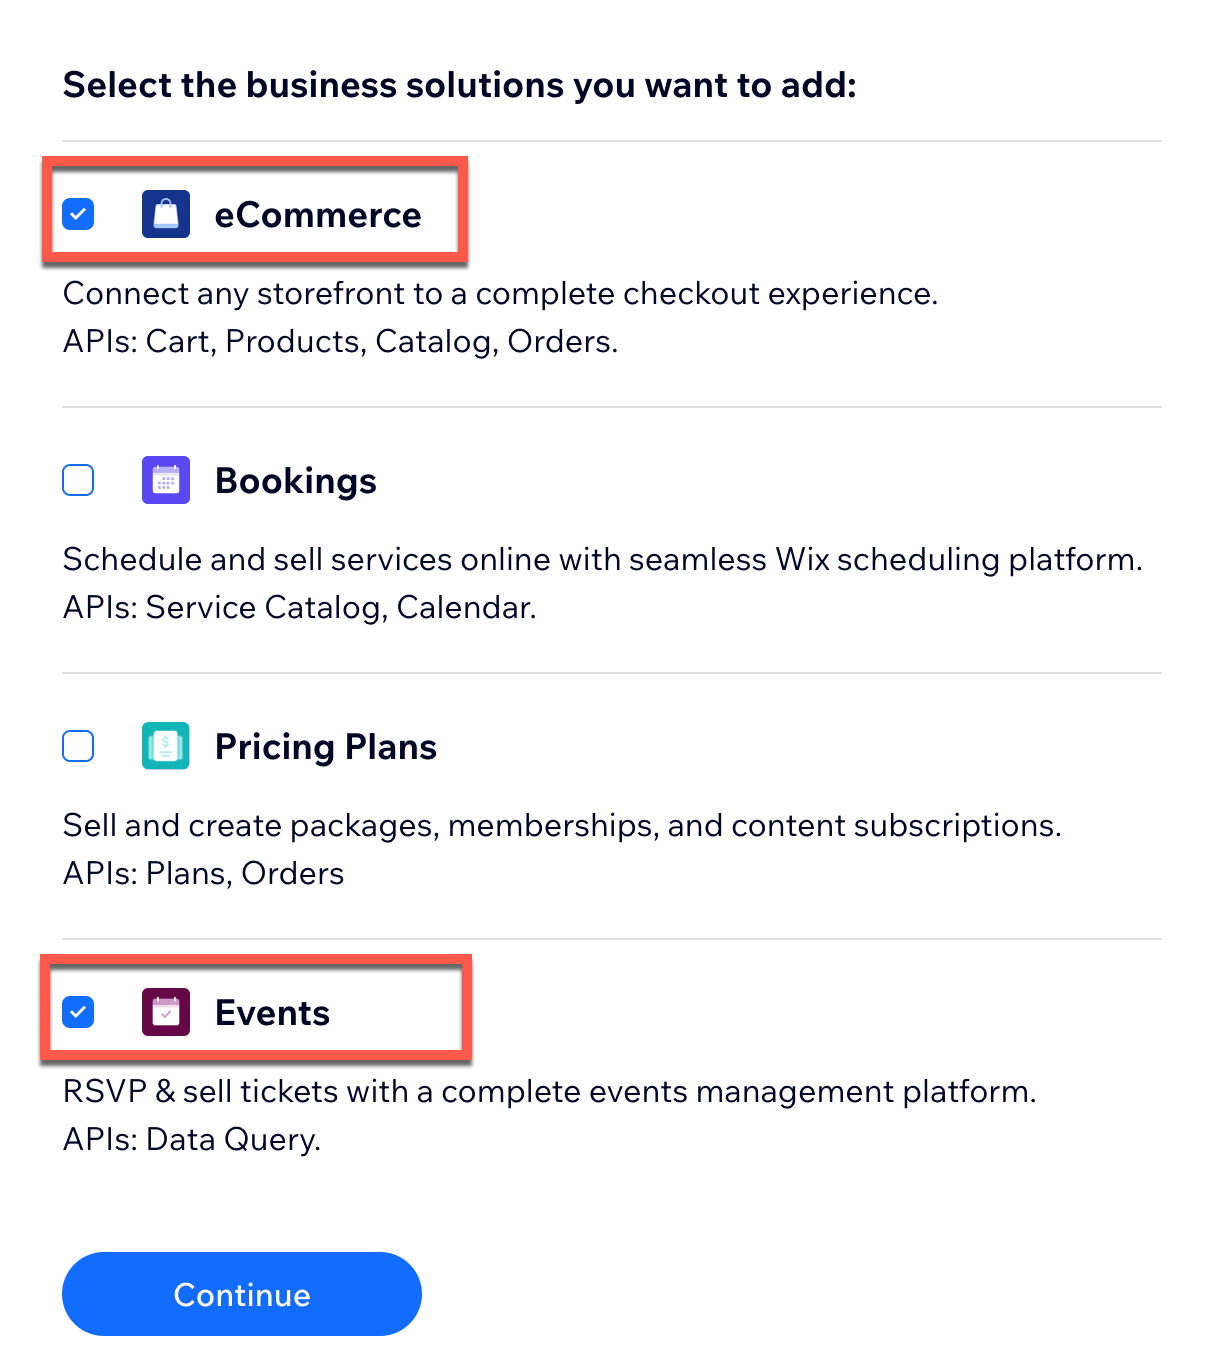 Apps Menu - select Bookings and Pricing Plans